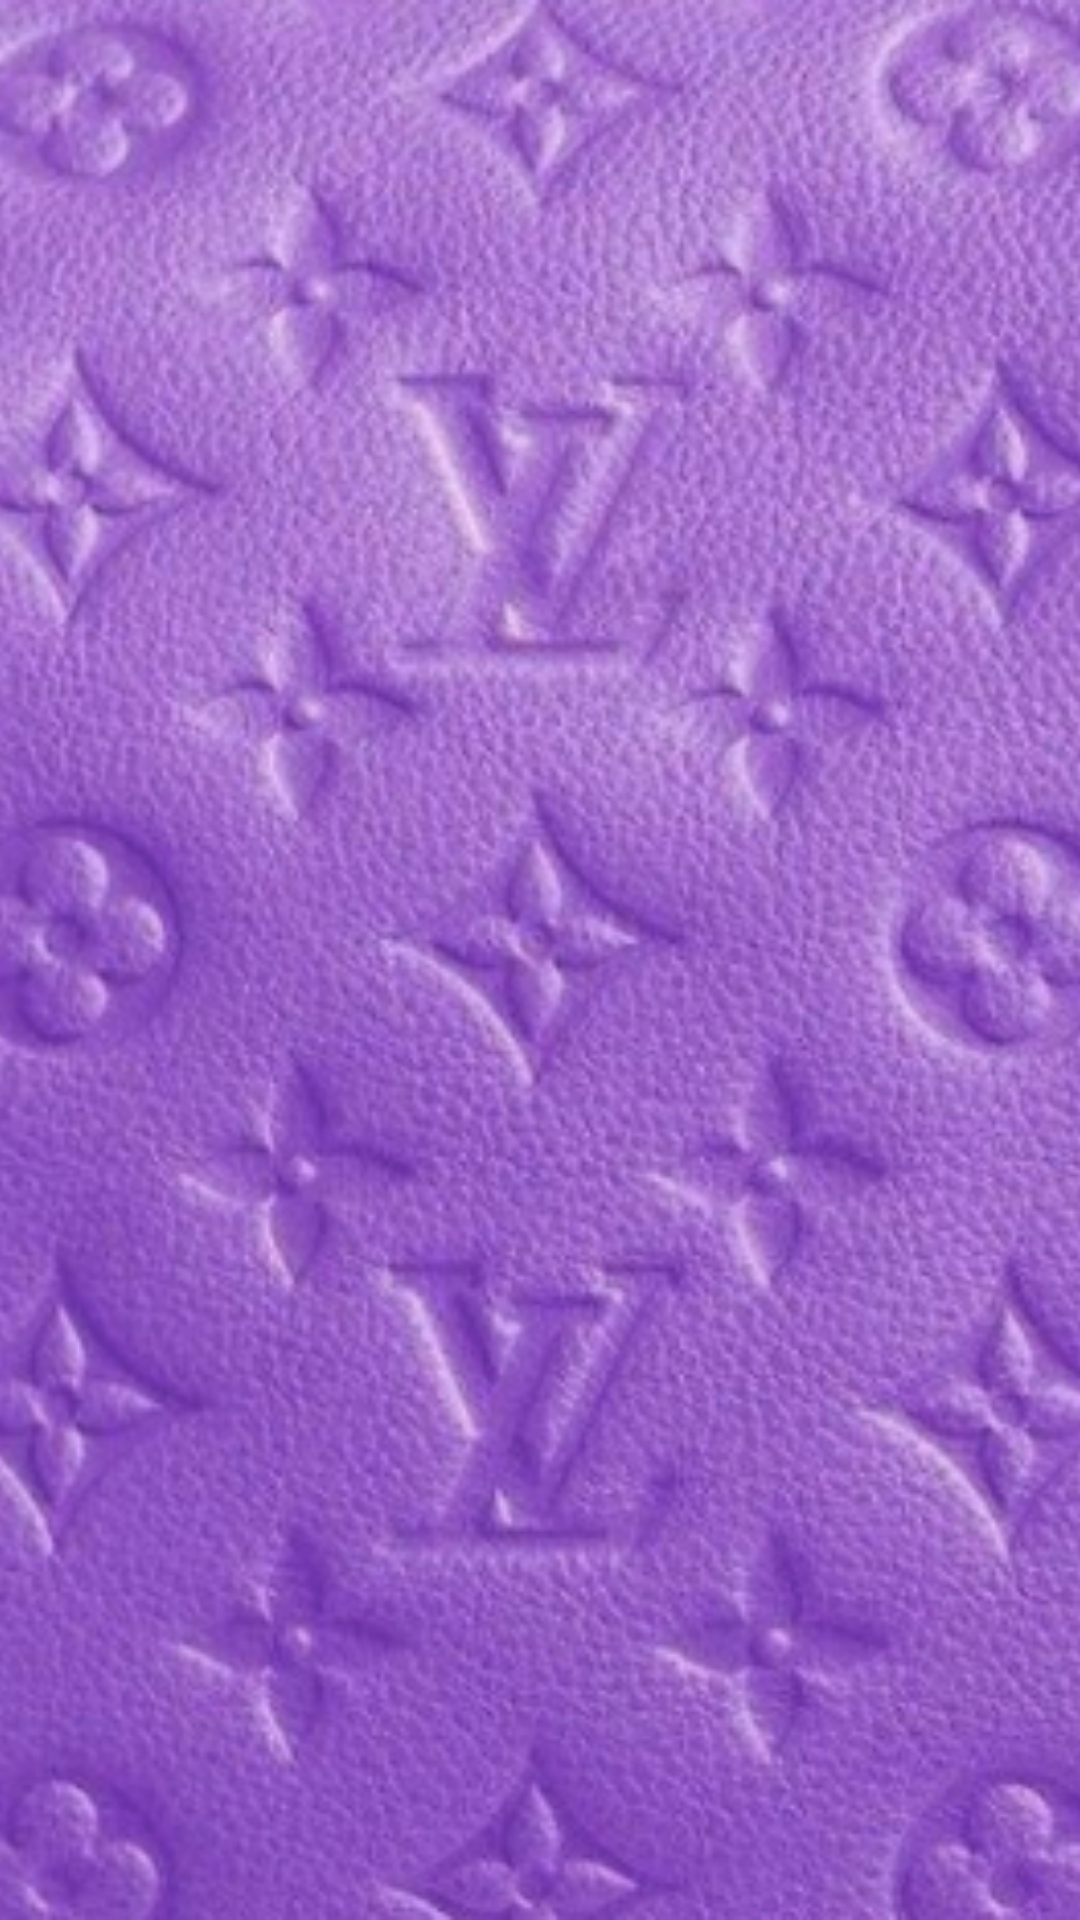 Louis Vuitton Indie wallpaper by Amy11_official - Download on